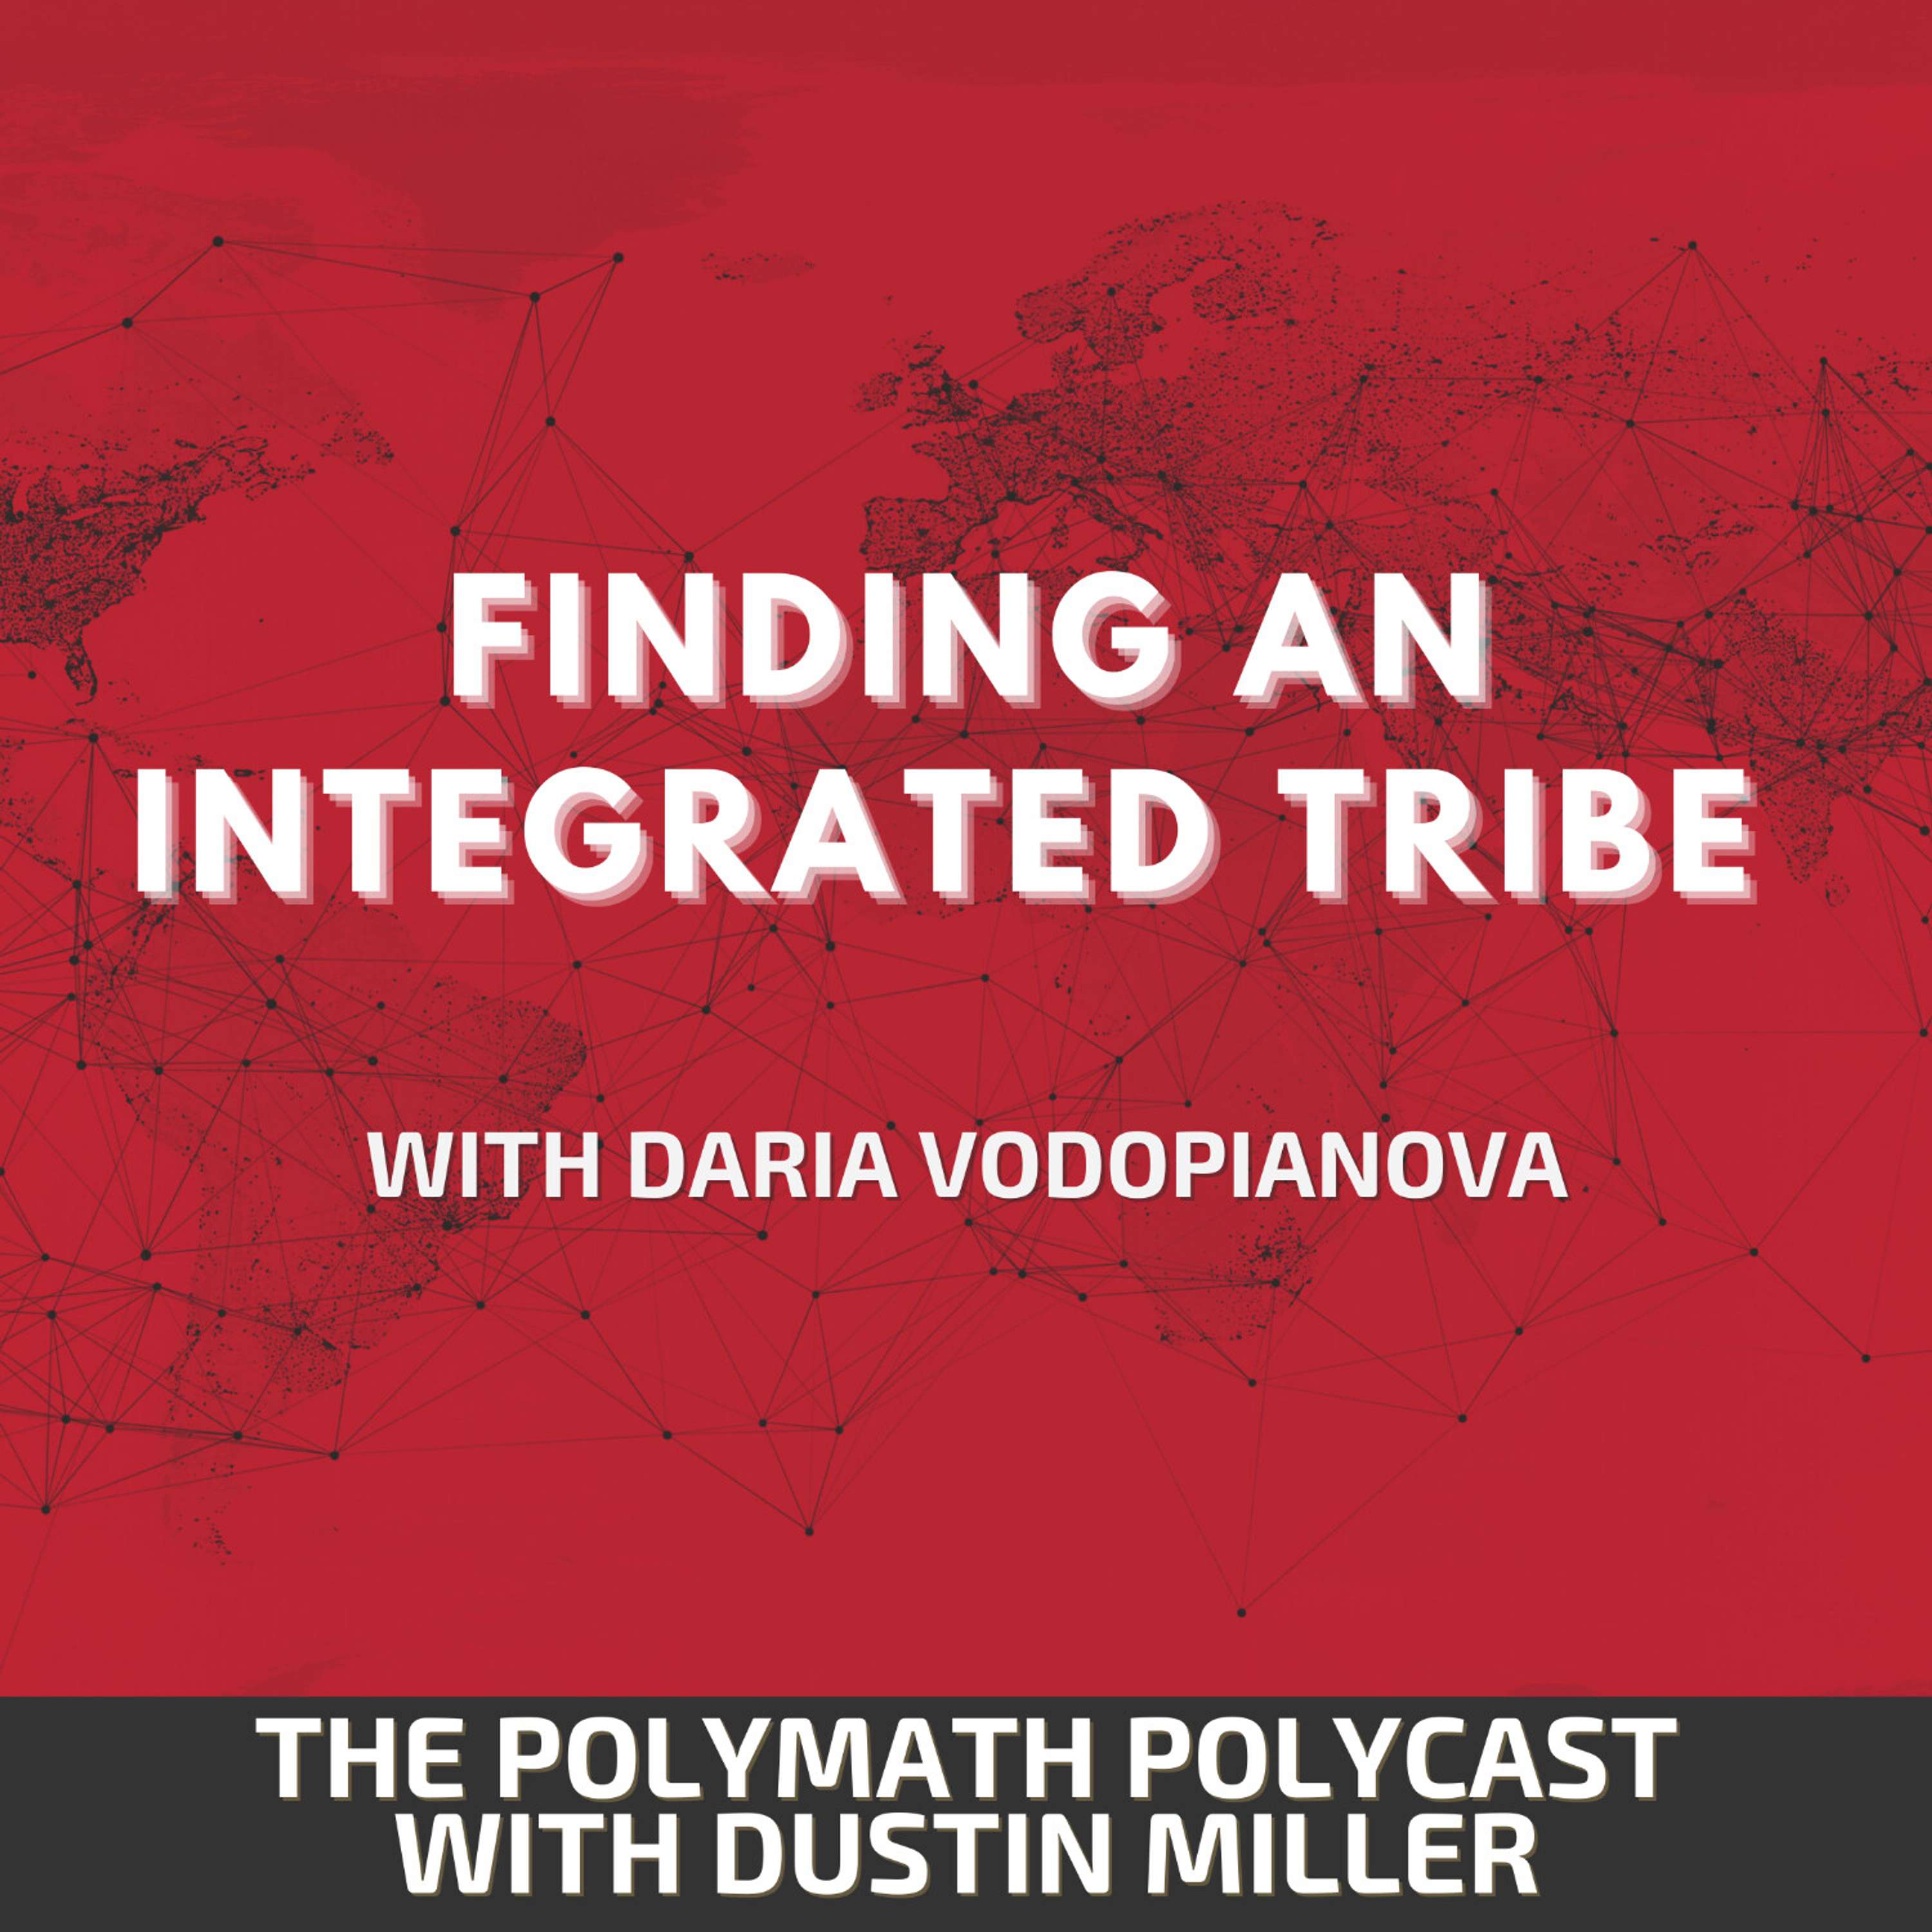 Finding an Integrated Tribe with Daria Vodopianova [Interview]